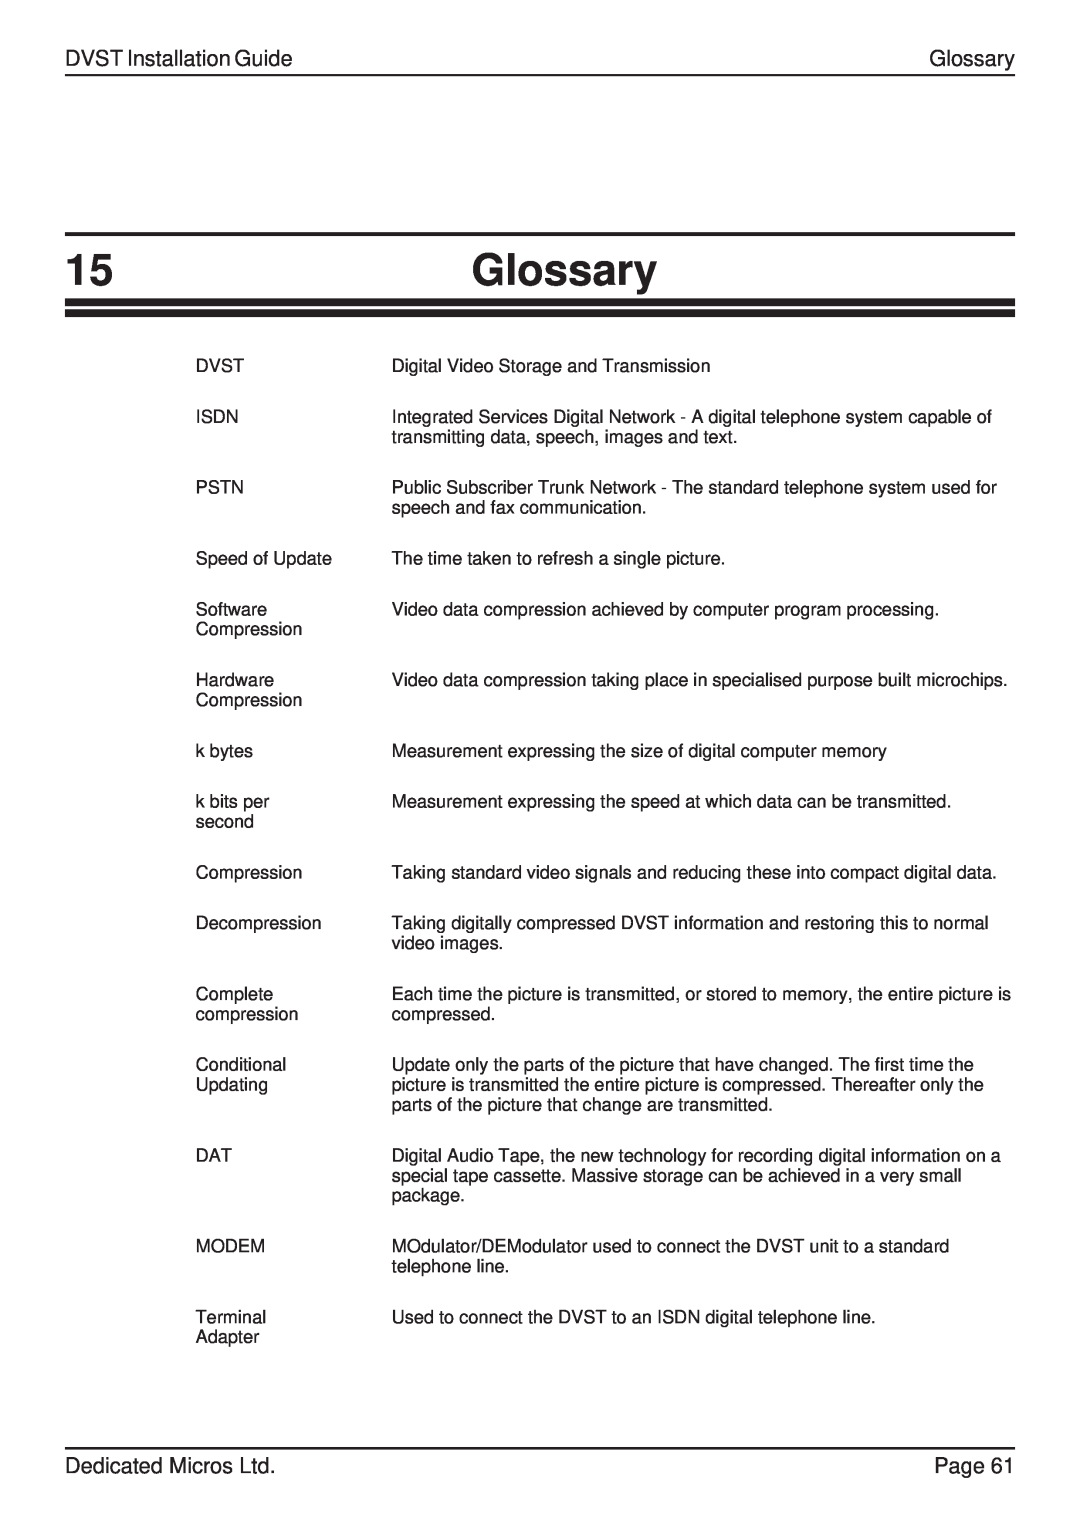 Guardian Technologies DFT 150/175 manual 15Glossary, DVST Installation Guide, Page 